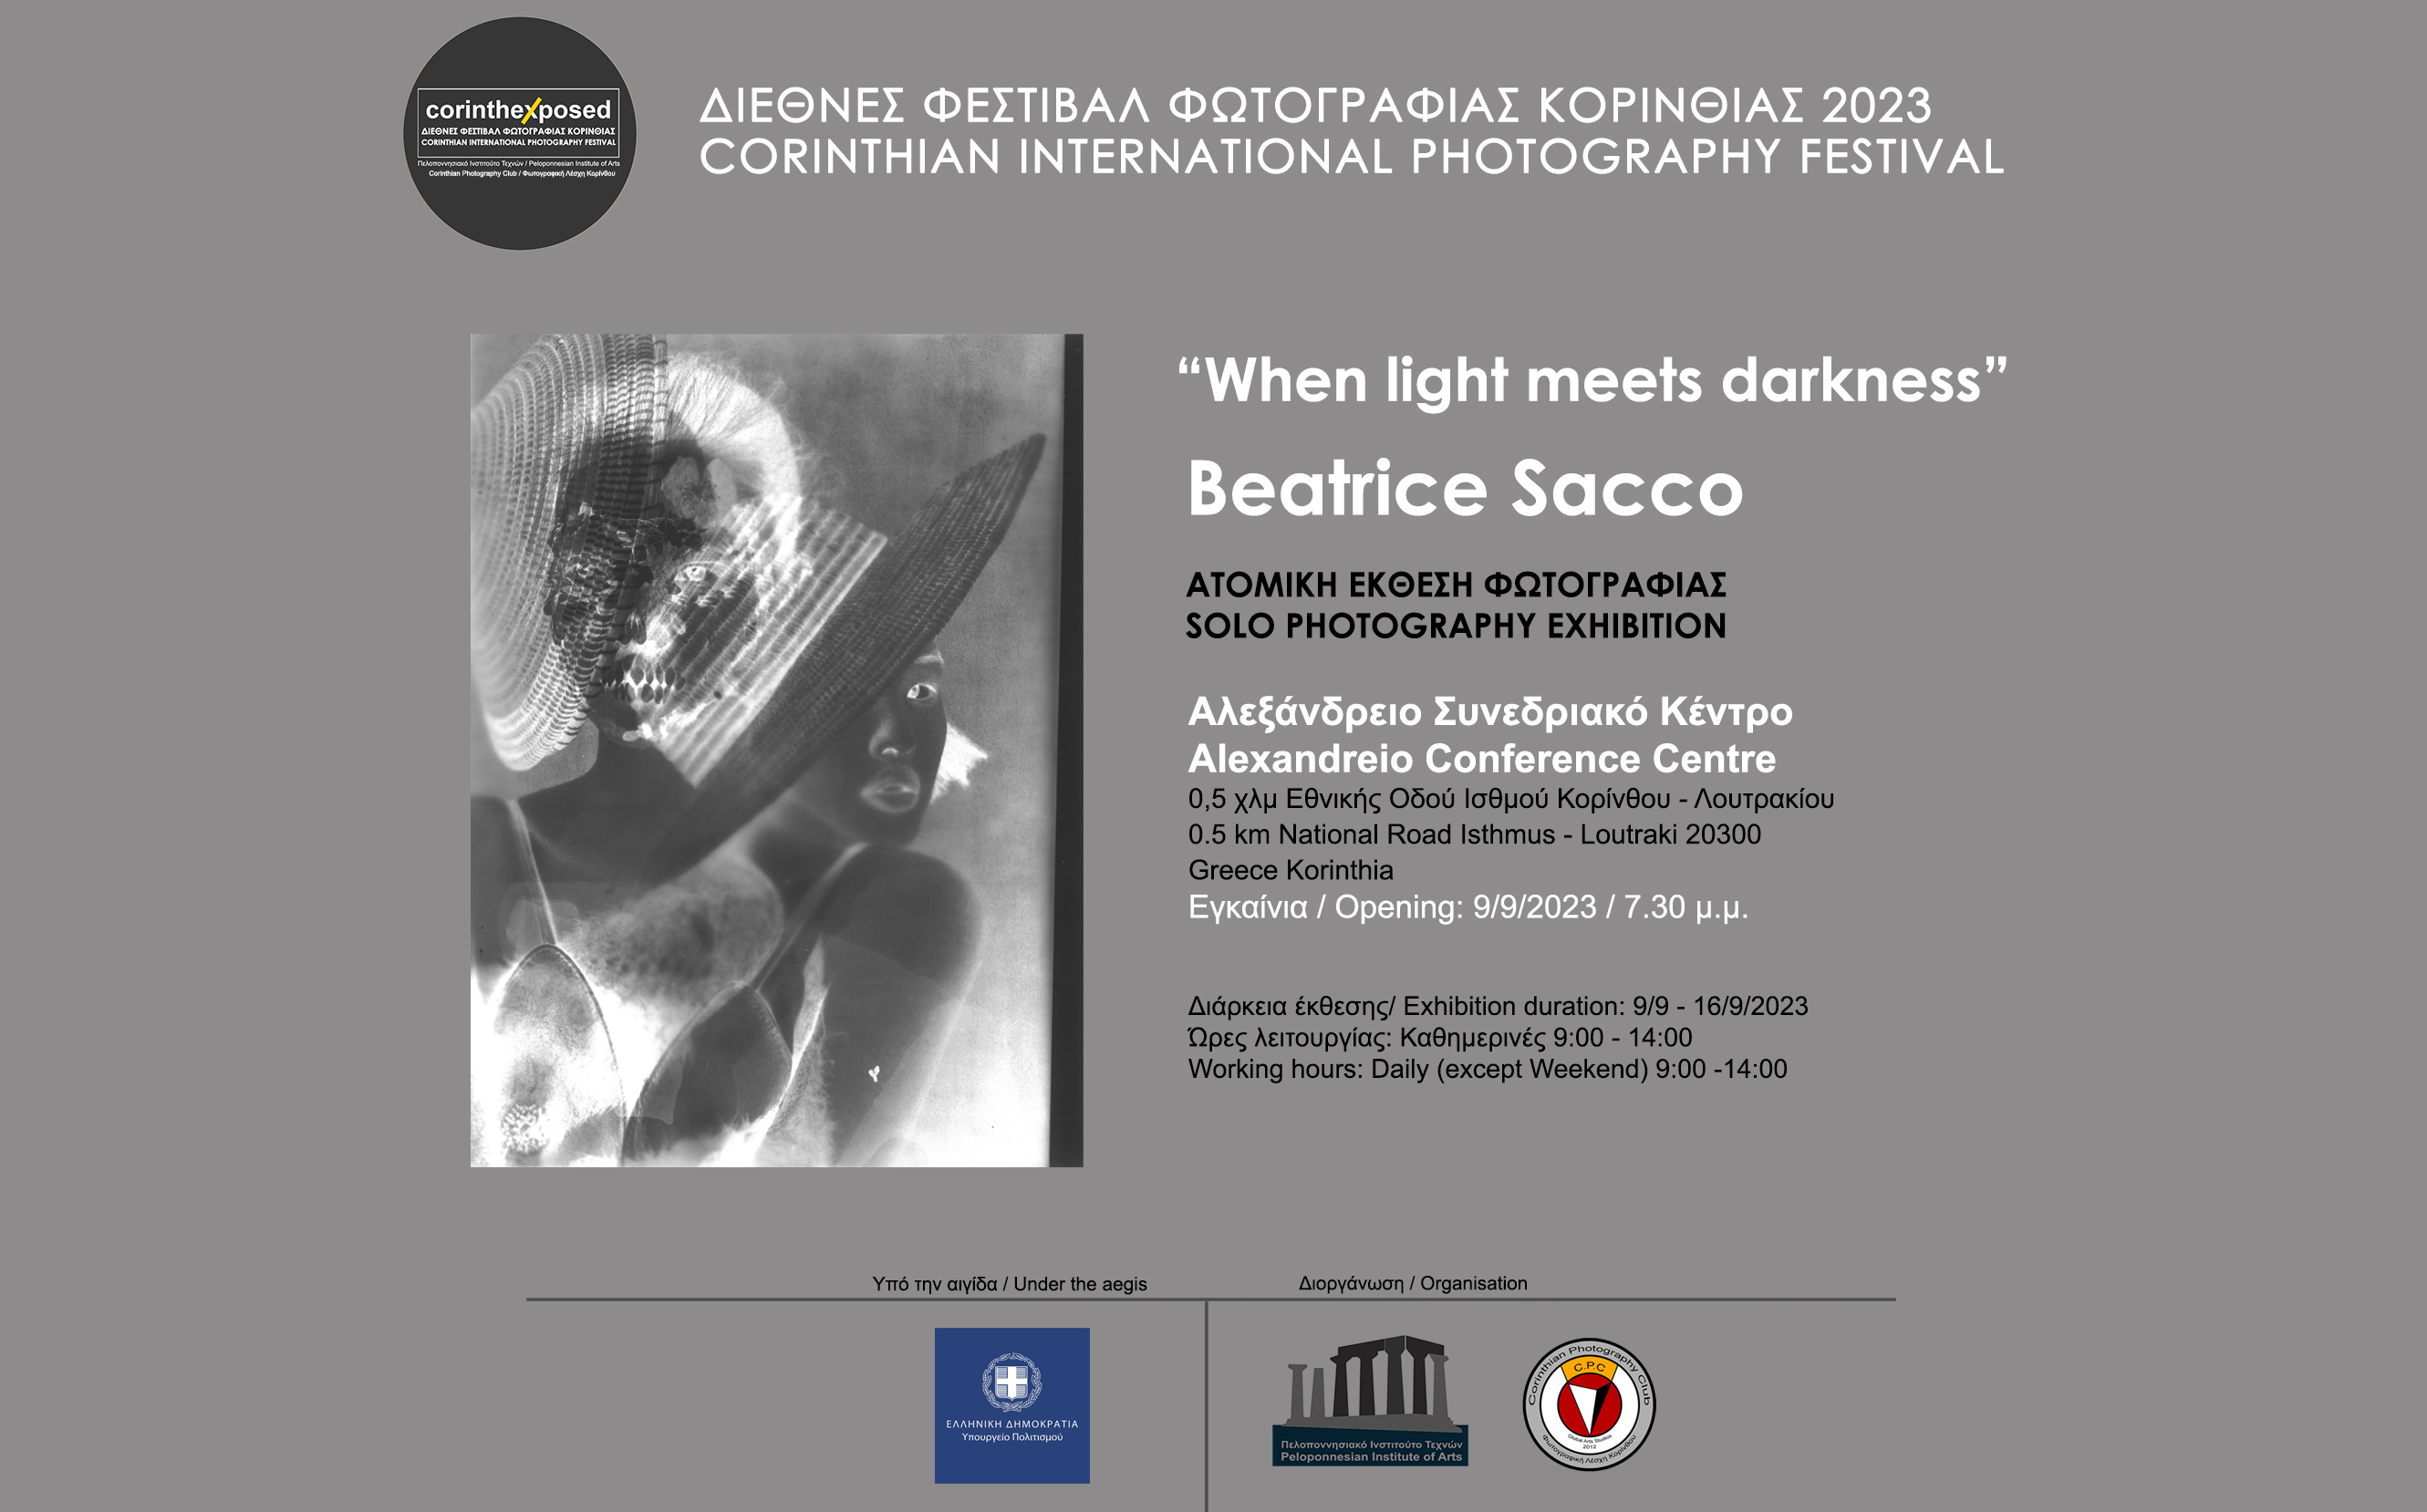 "When light meets darkness" photography exhibition by Beatrice Sacco